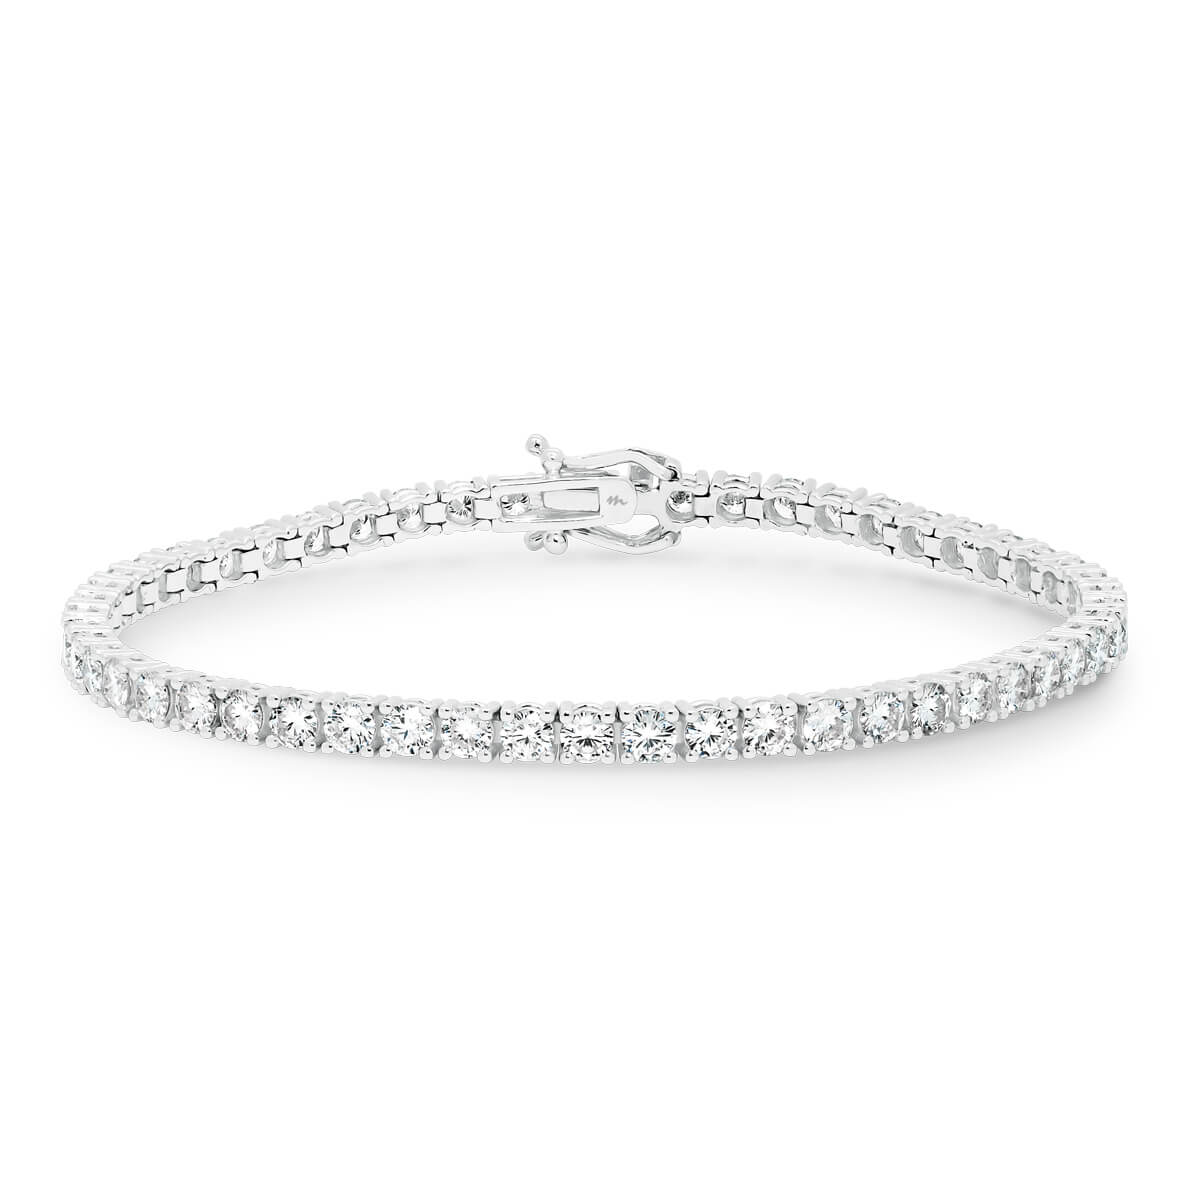 Mikayla 3.0 Sn Classic 4-Prong Tennis Bracelet In 18K Gold With Safety Clasp